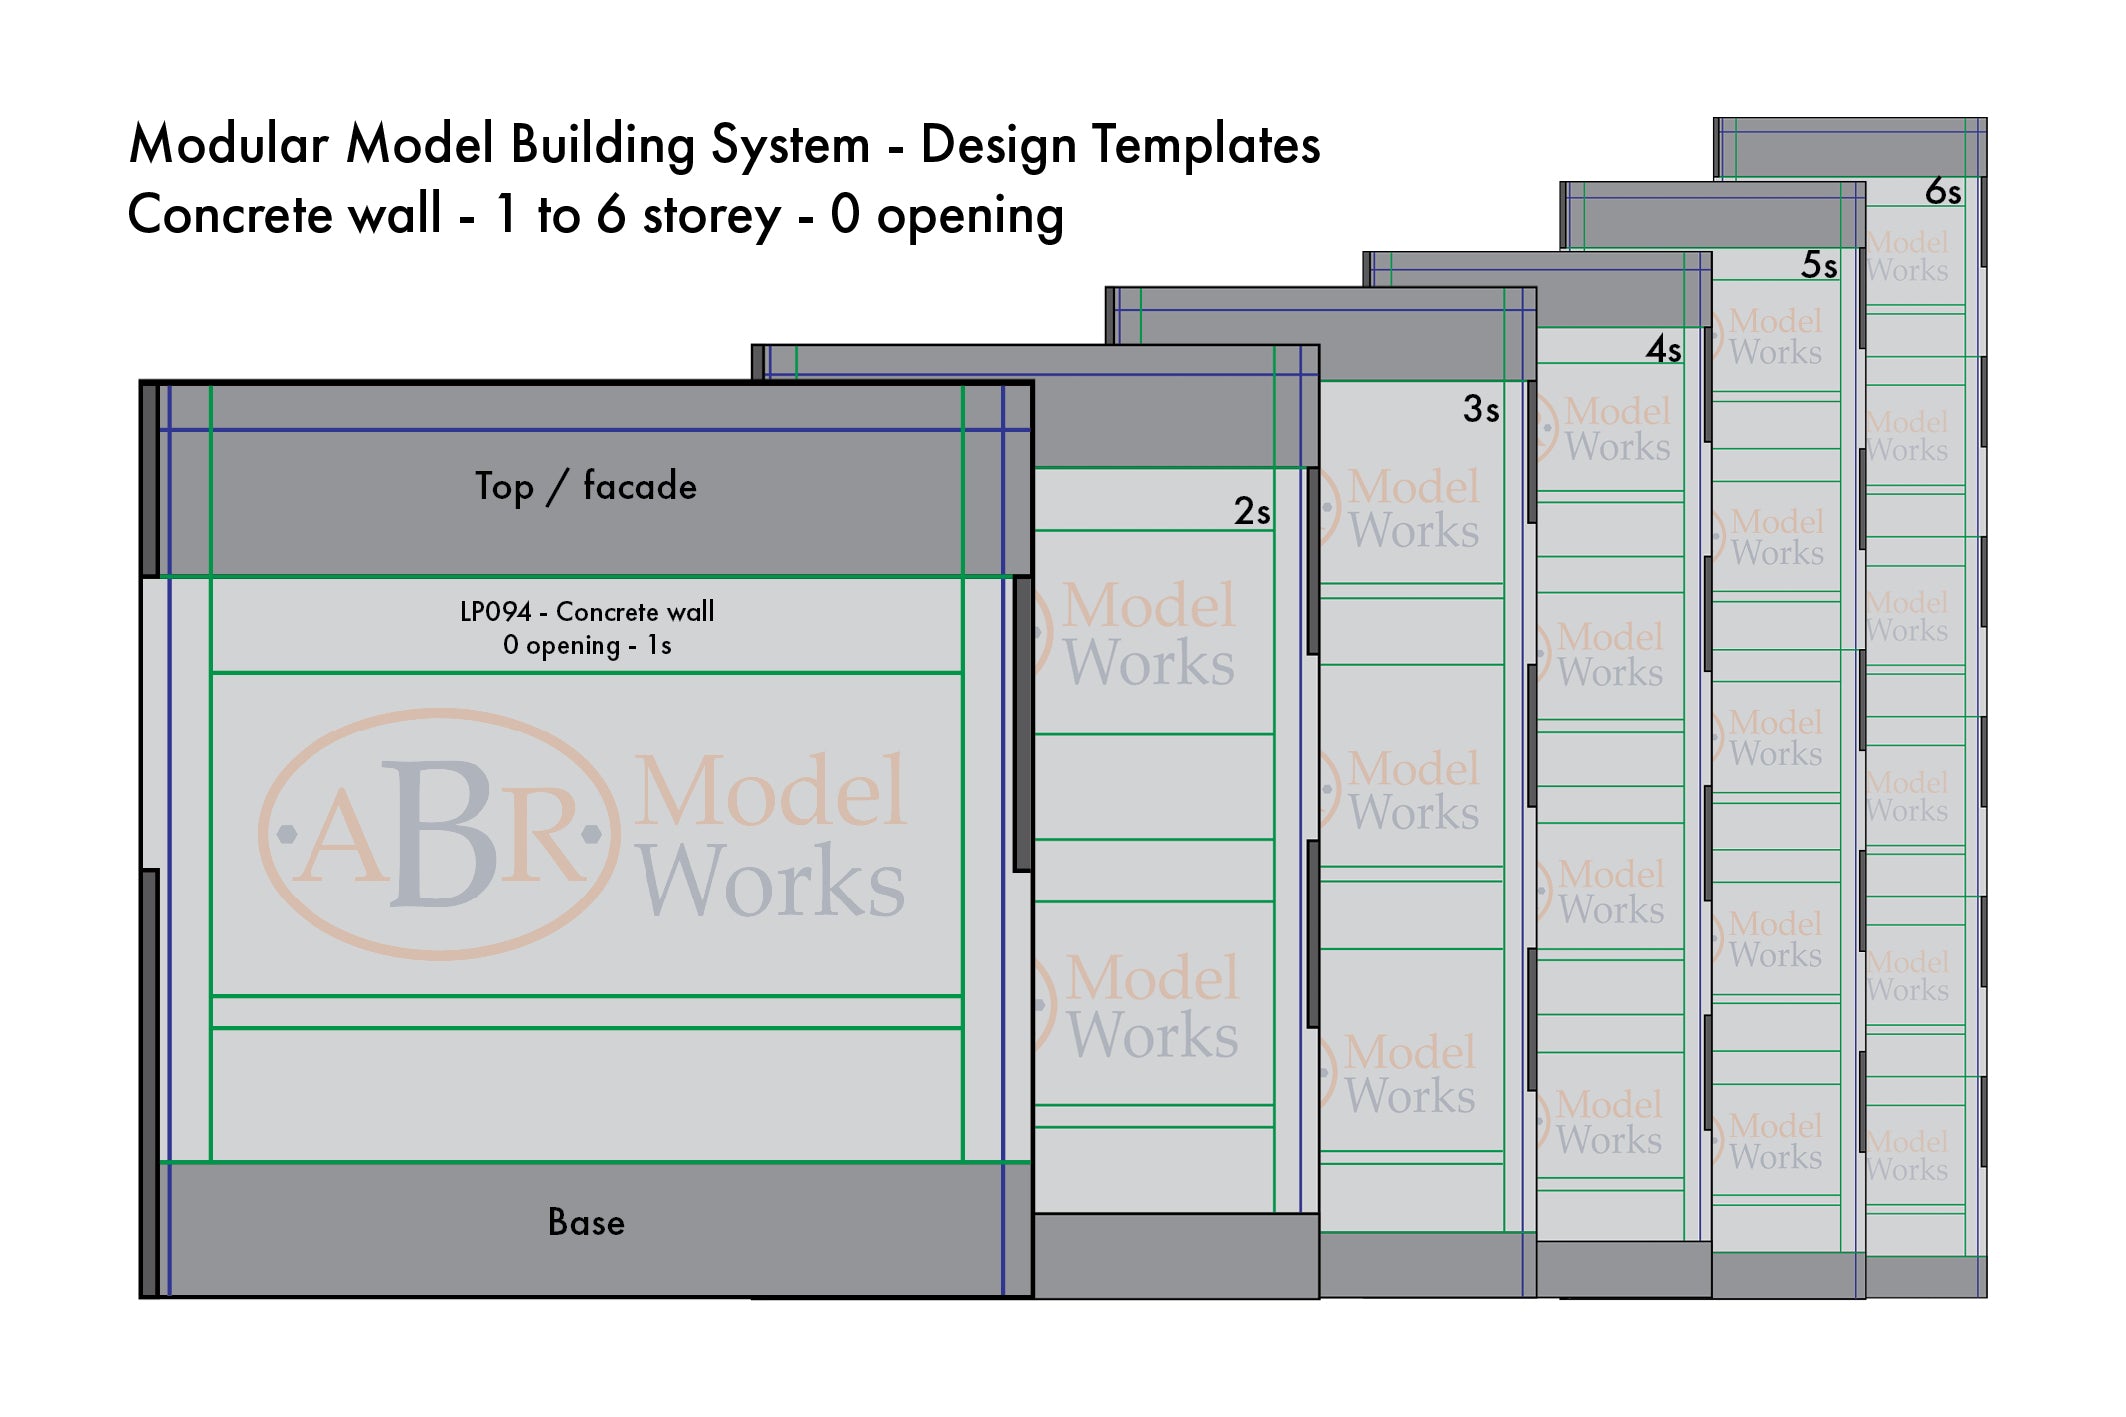 MBSDT-LP094-99 - Concrete wall with 0 openings 1 to 6 storeys - MMBS panel template